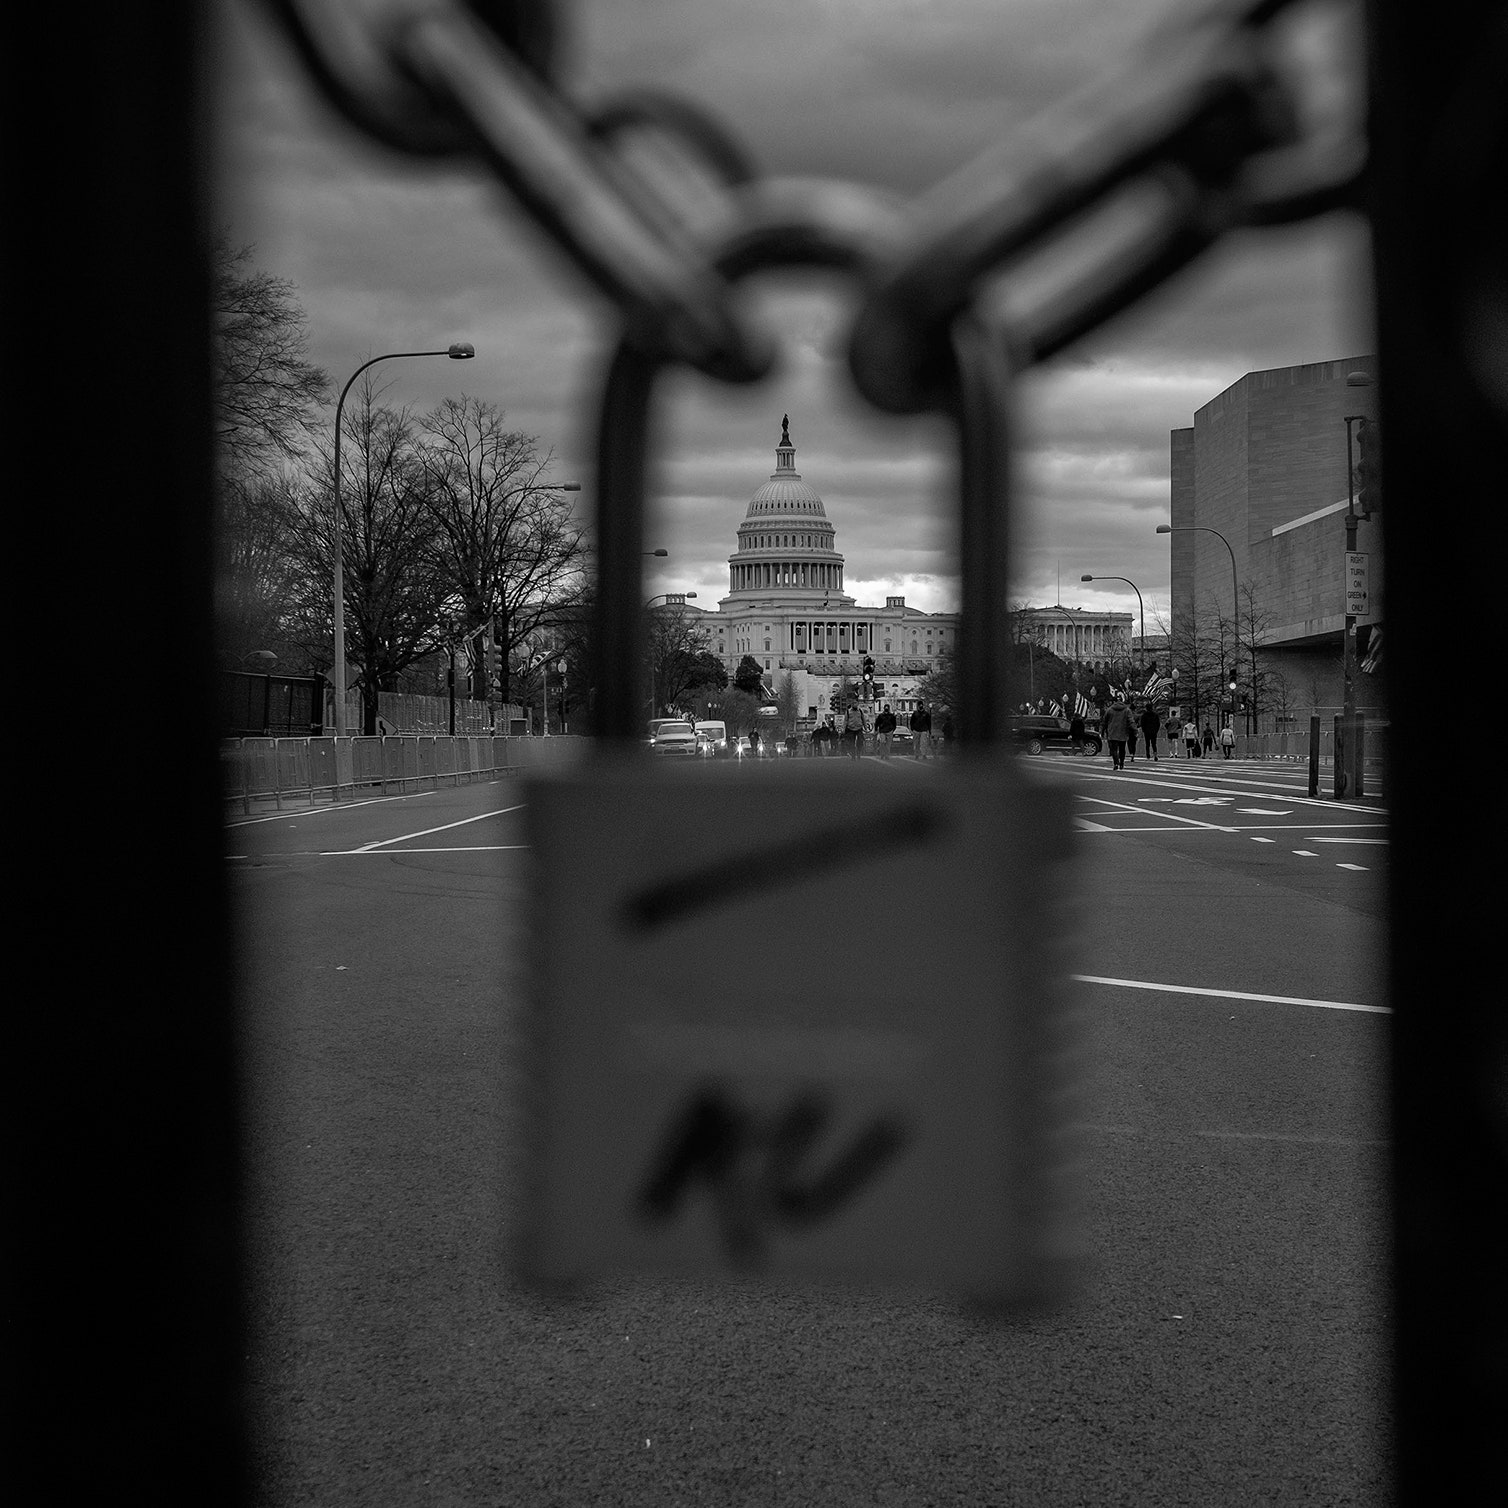 A blackandwhite photograph of the U.S. Capitol seen through a gate and padlock.